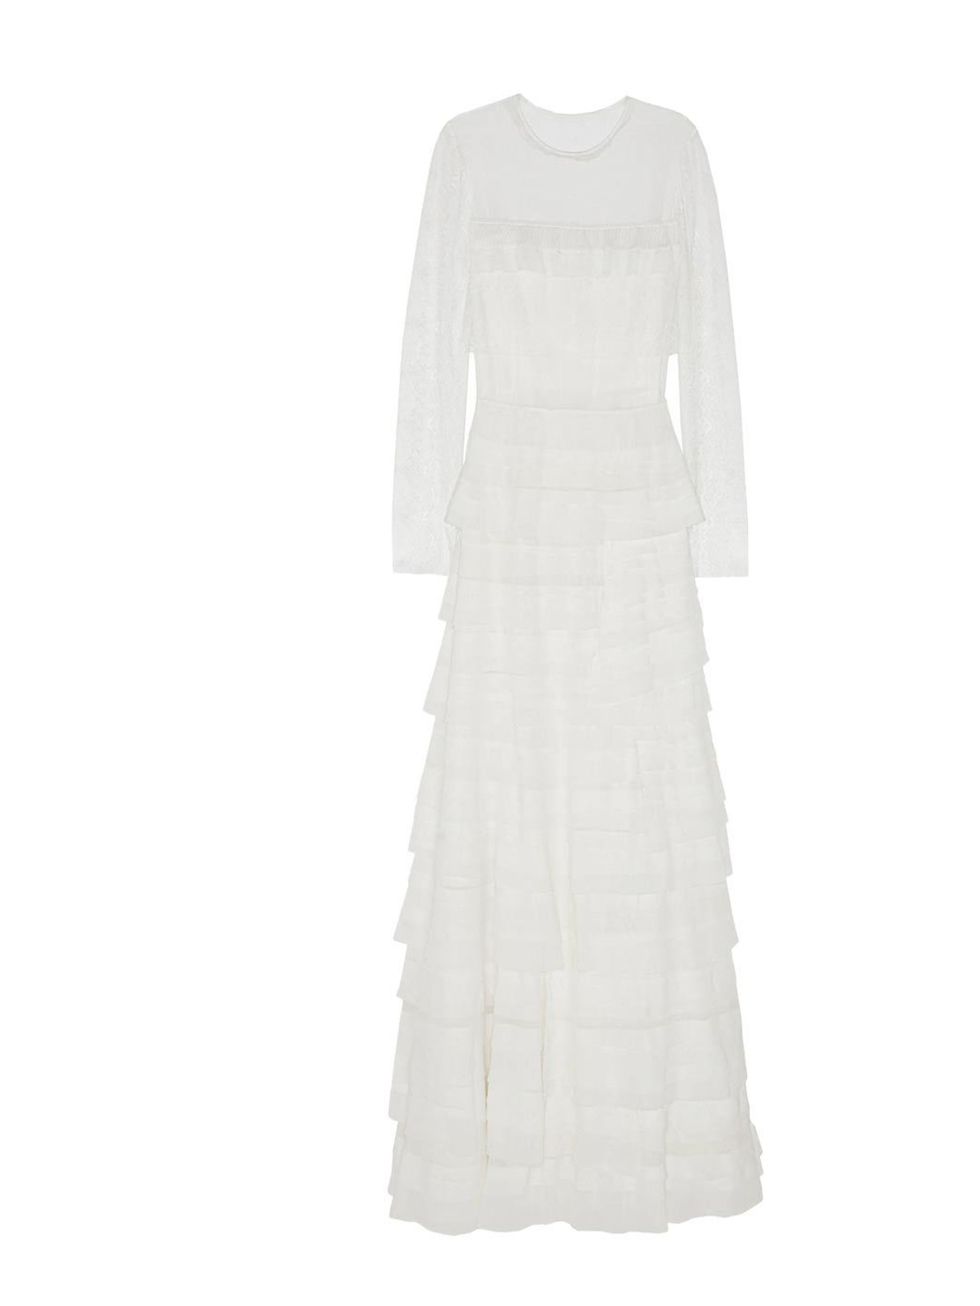 <p>Alberta Ferretti lace and silk gown, was £5,660 now £1,698, at <a href="http://www.net-a-porter.com/product/382838">Net-a-Porter</a></p>